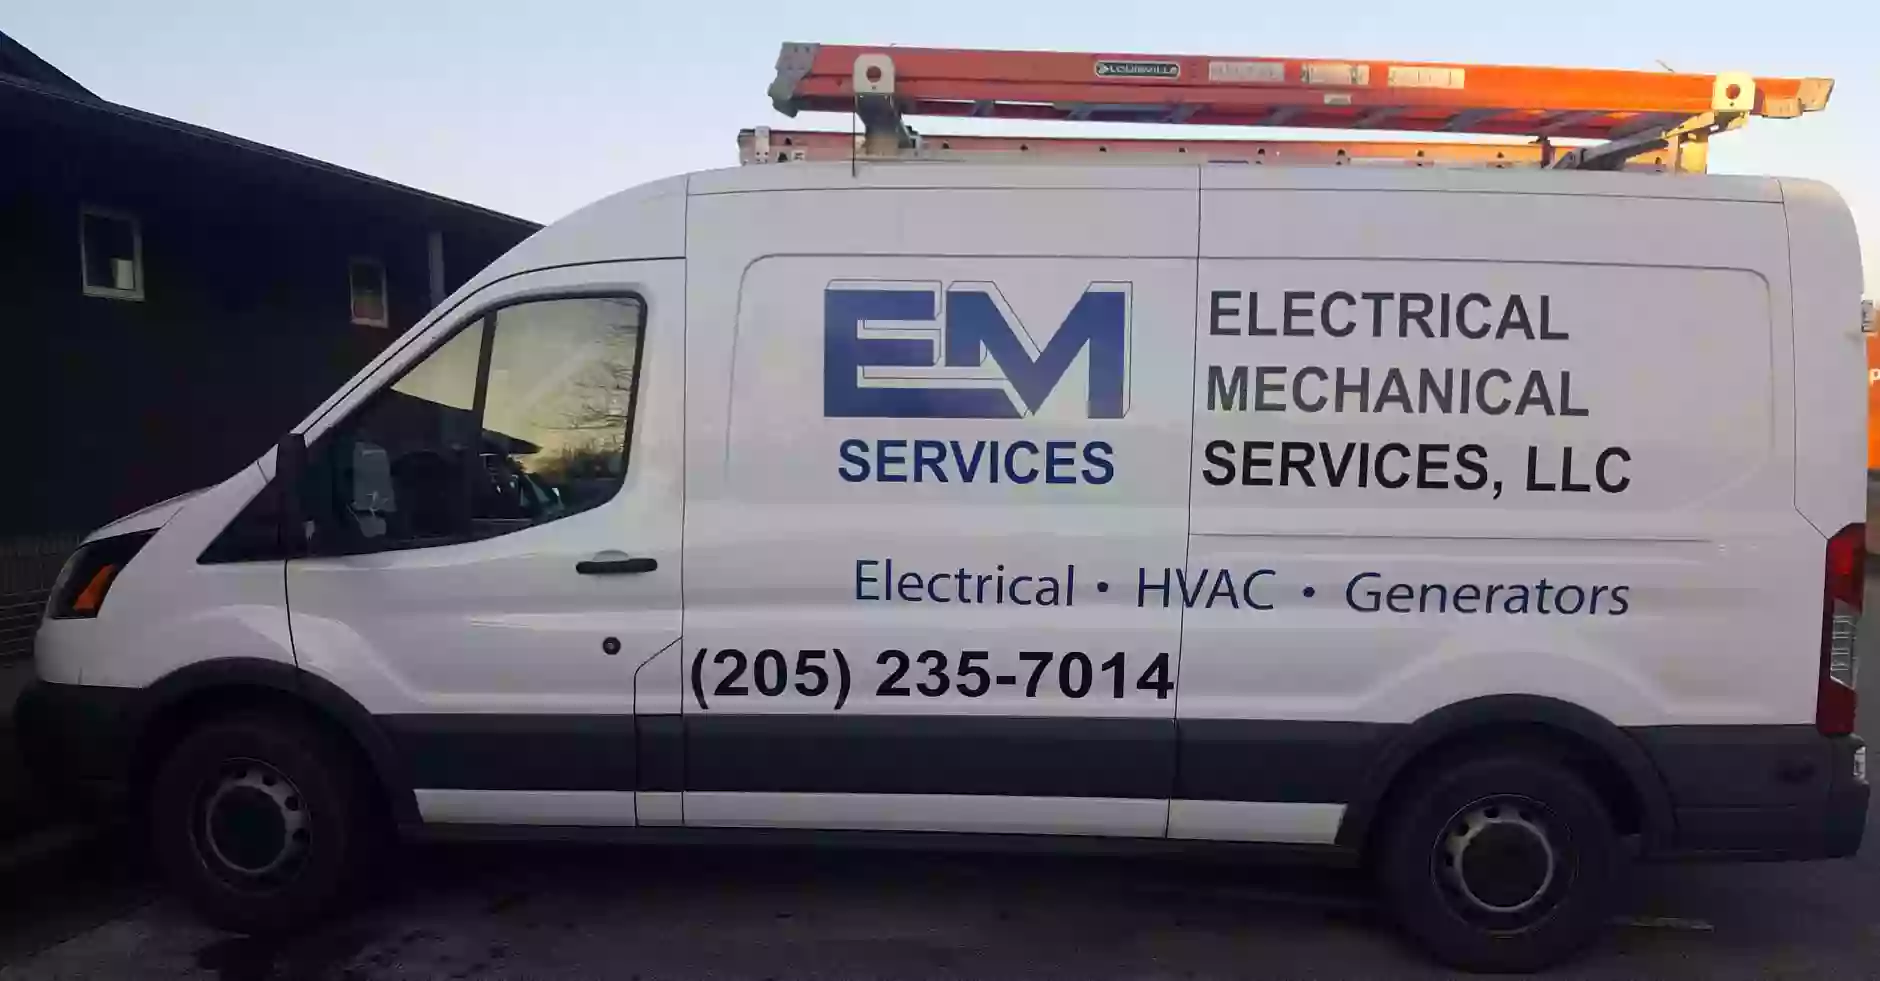 Electrical & Mechanical Services, LLC